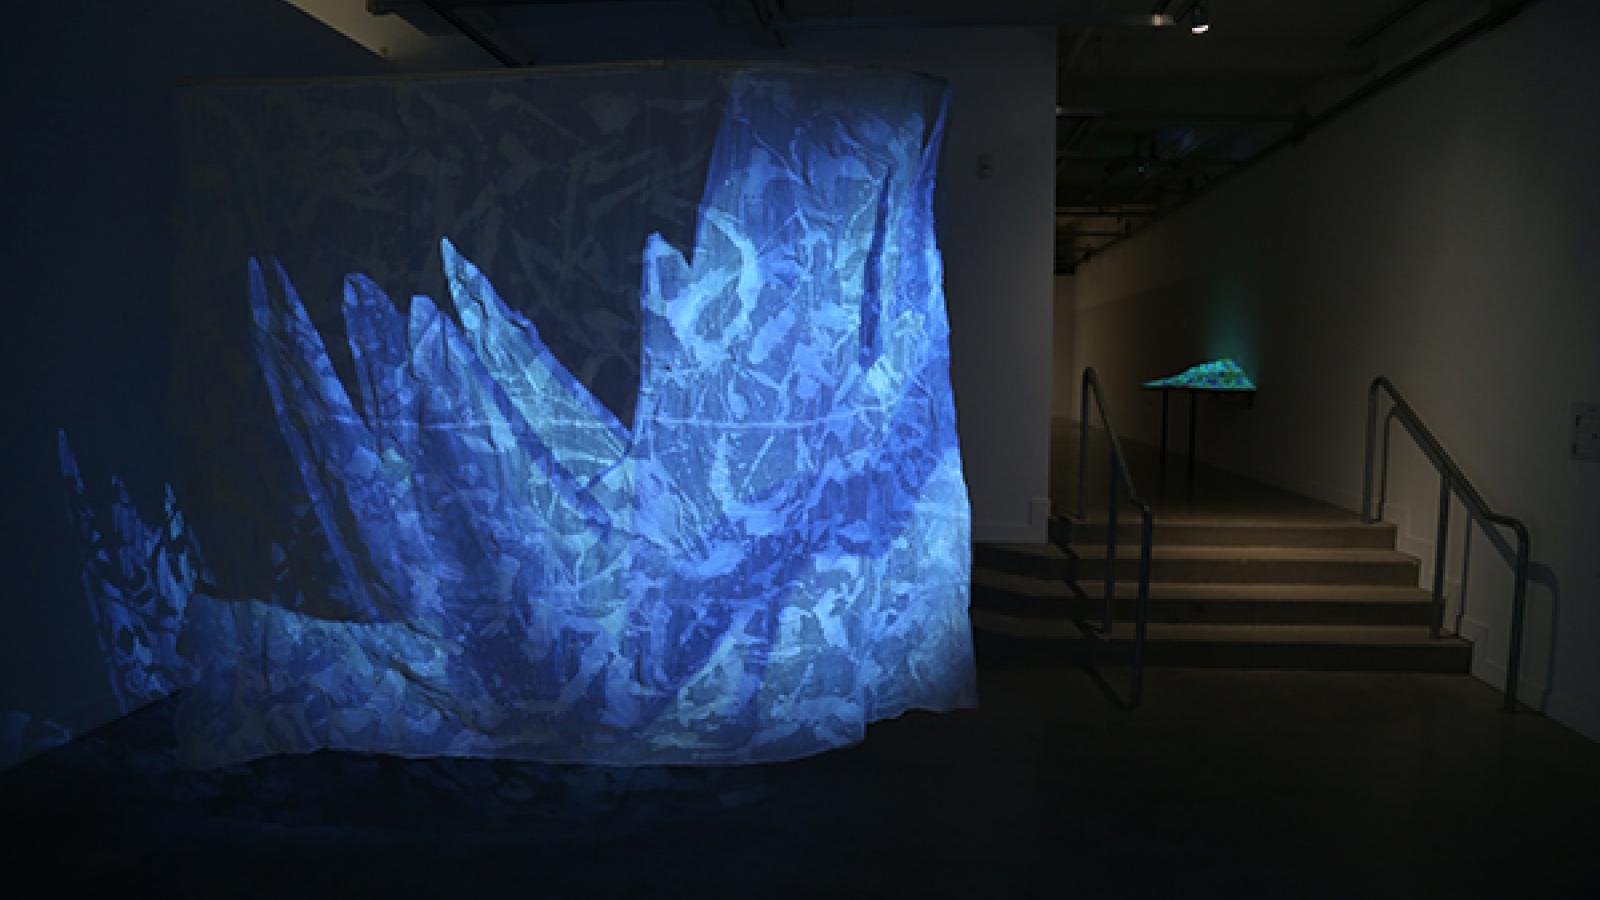 Justin Deuel: "A Tear in the Fabric," cheesecloth, wax, digital video, 2014